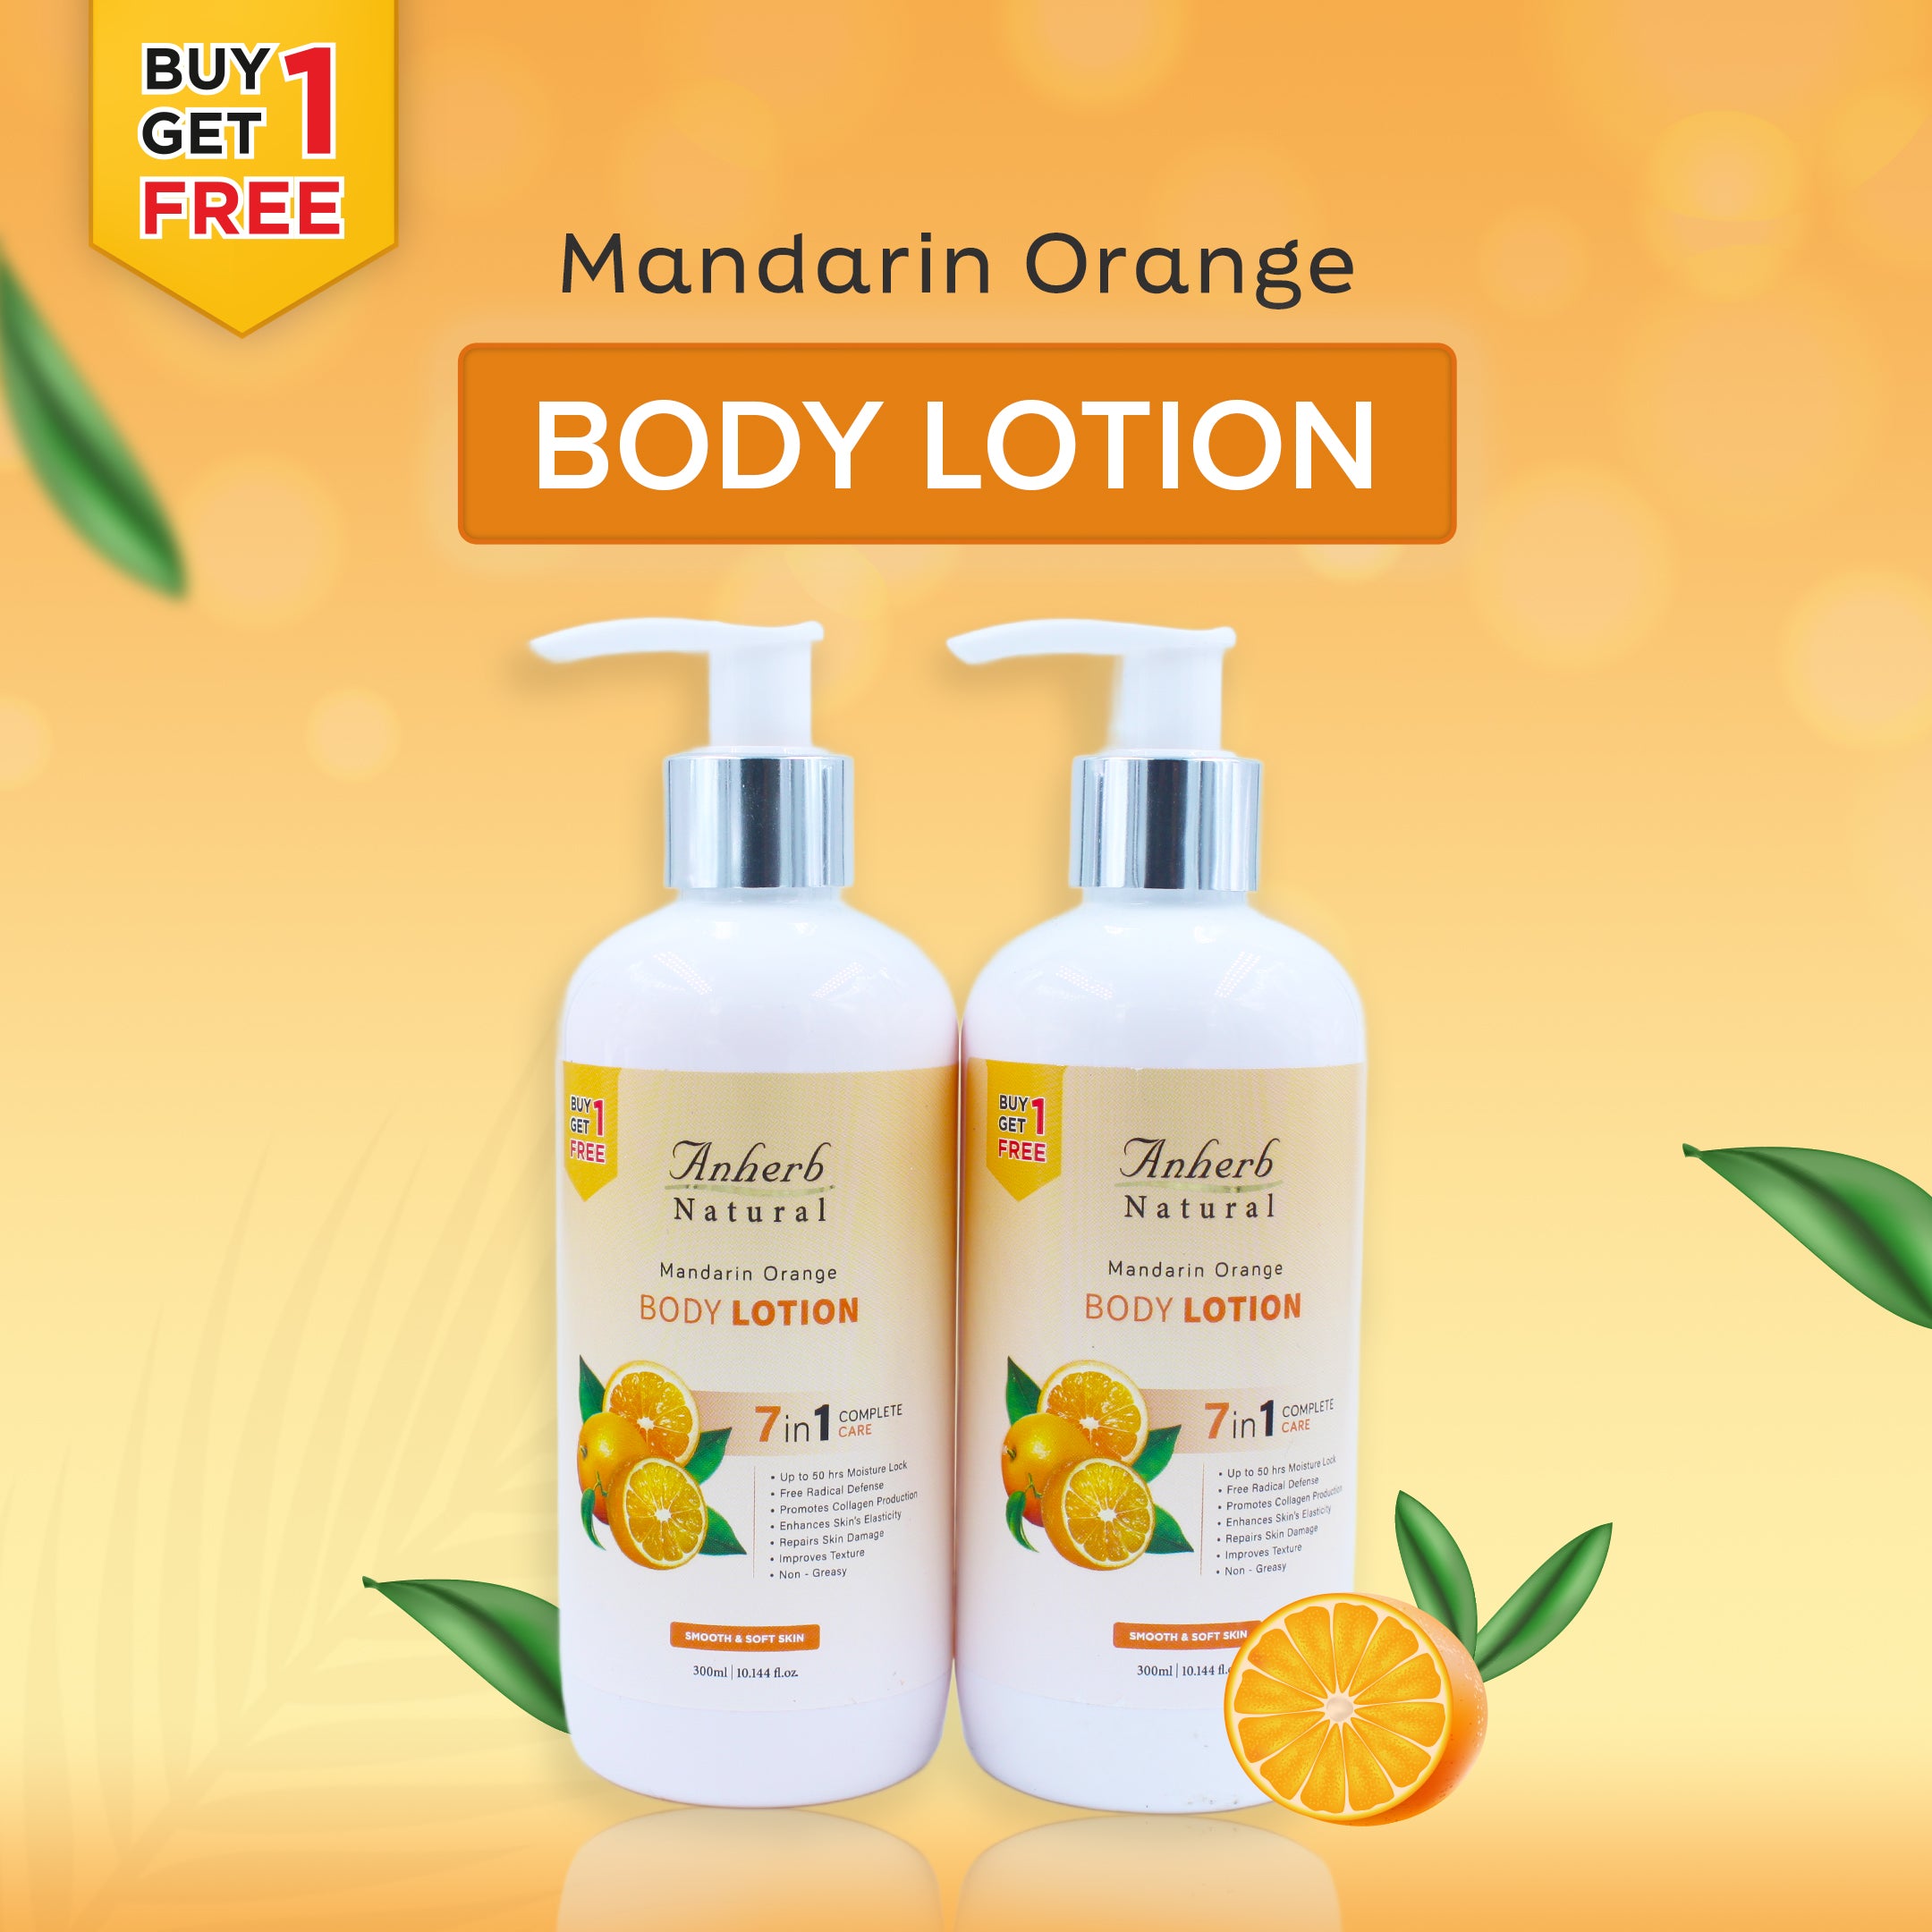 Mandarin Orange Body Lotion -300ml | 7-in-1 Complete Care for Smooth and Soft Skin | Buy 1 Get 1